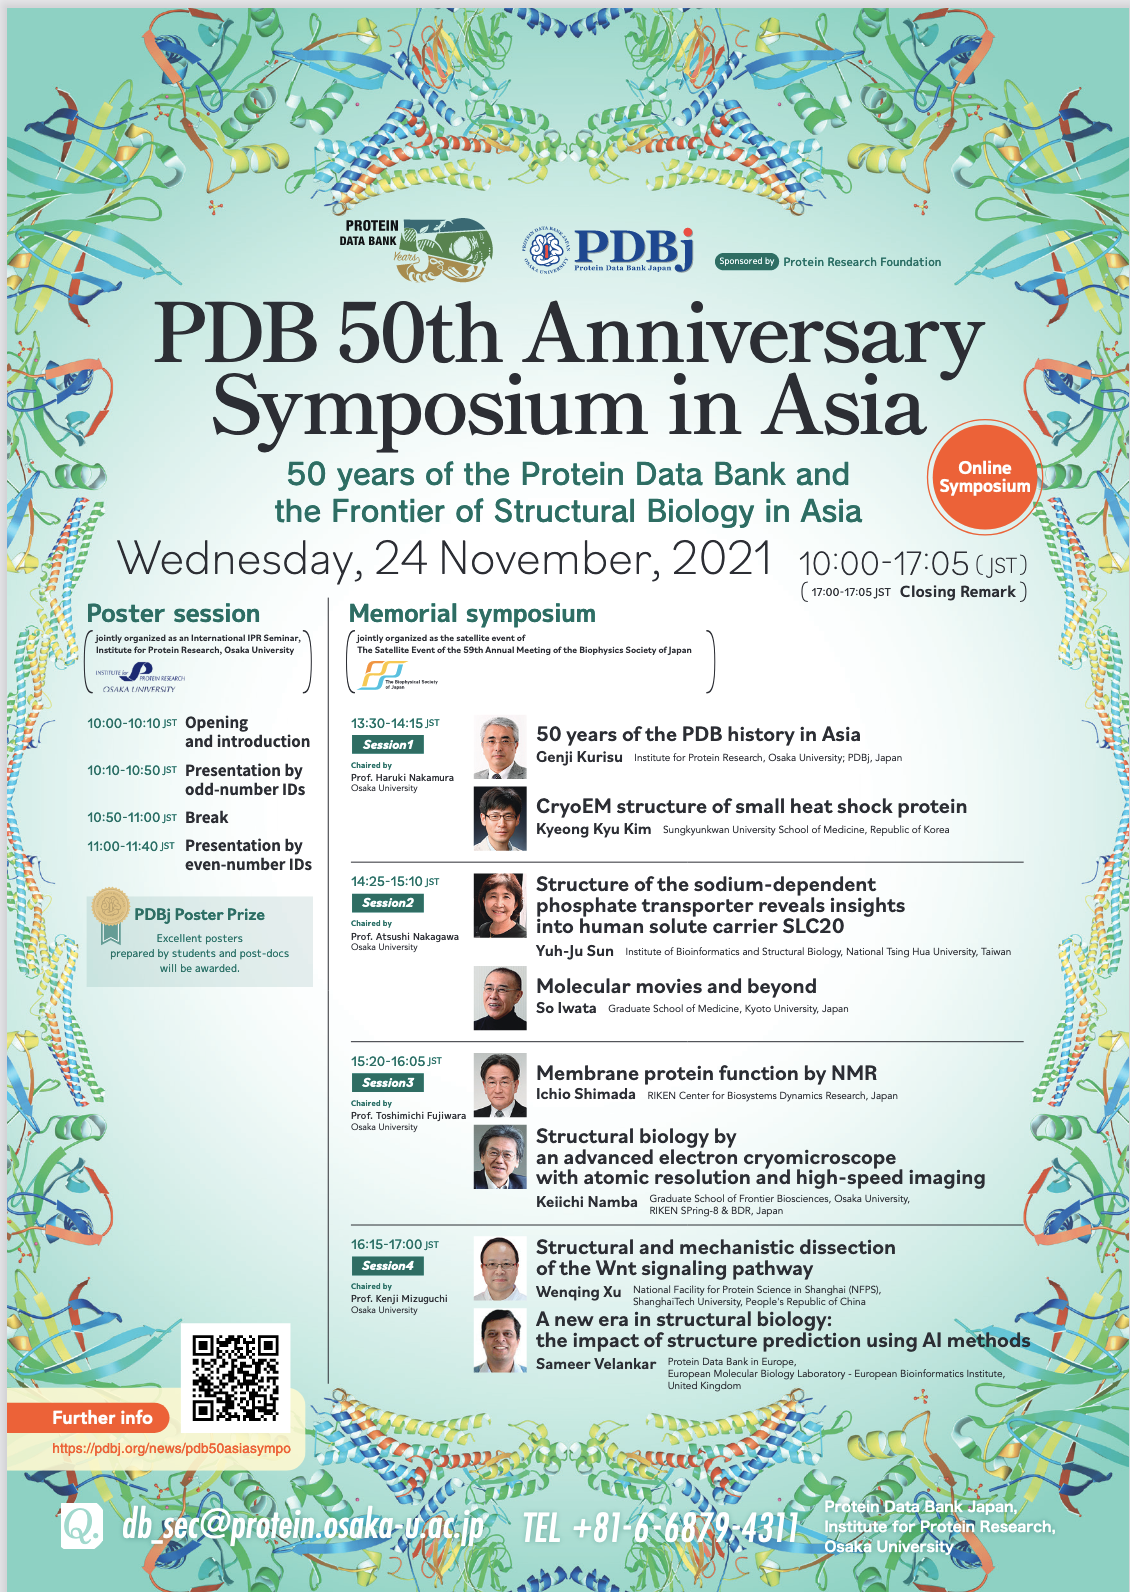 <A href="https://pdbj.org/news/pdb50asiasympo">Register by November 8 for the virtual symposium</a>